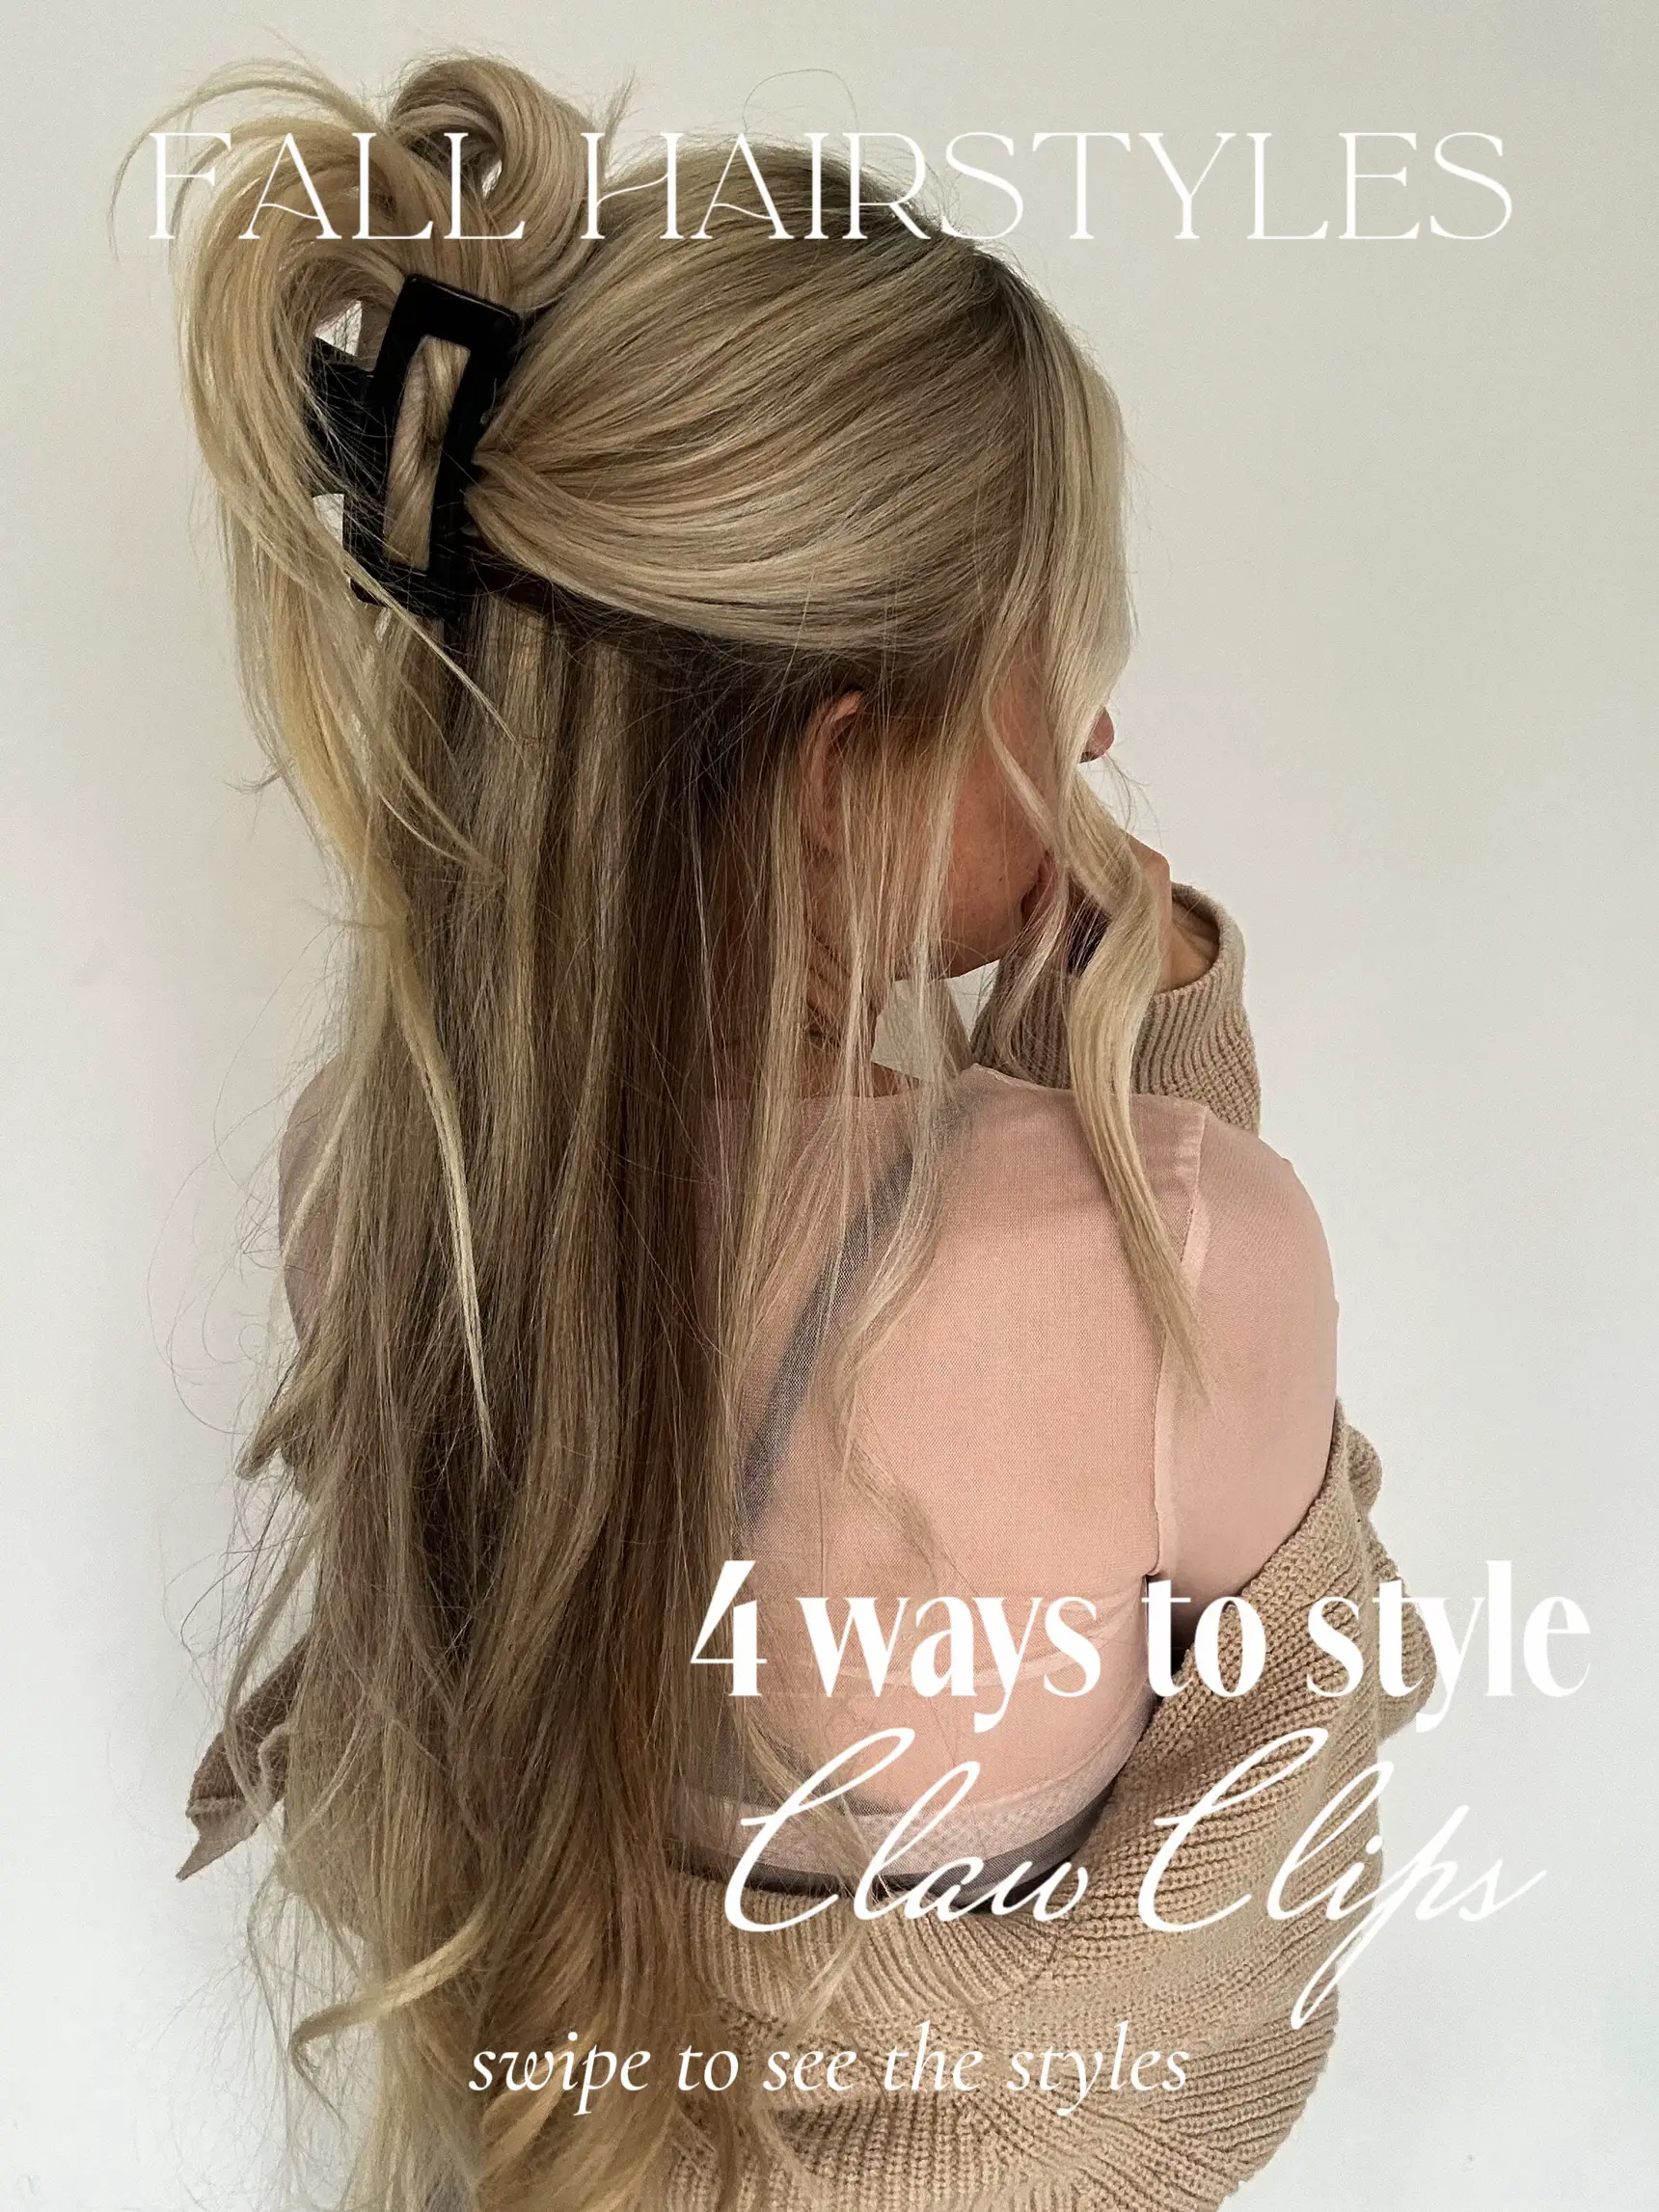 Easy claw clip hairstyle using a flower claw clip #hair #hairstyle #ha